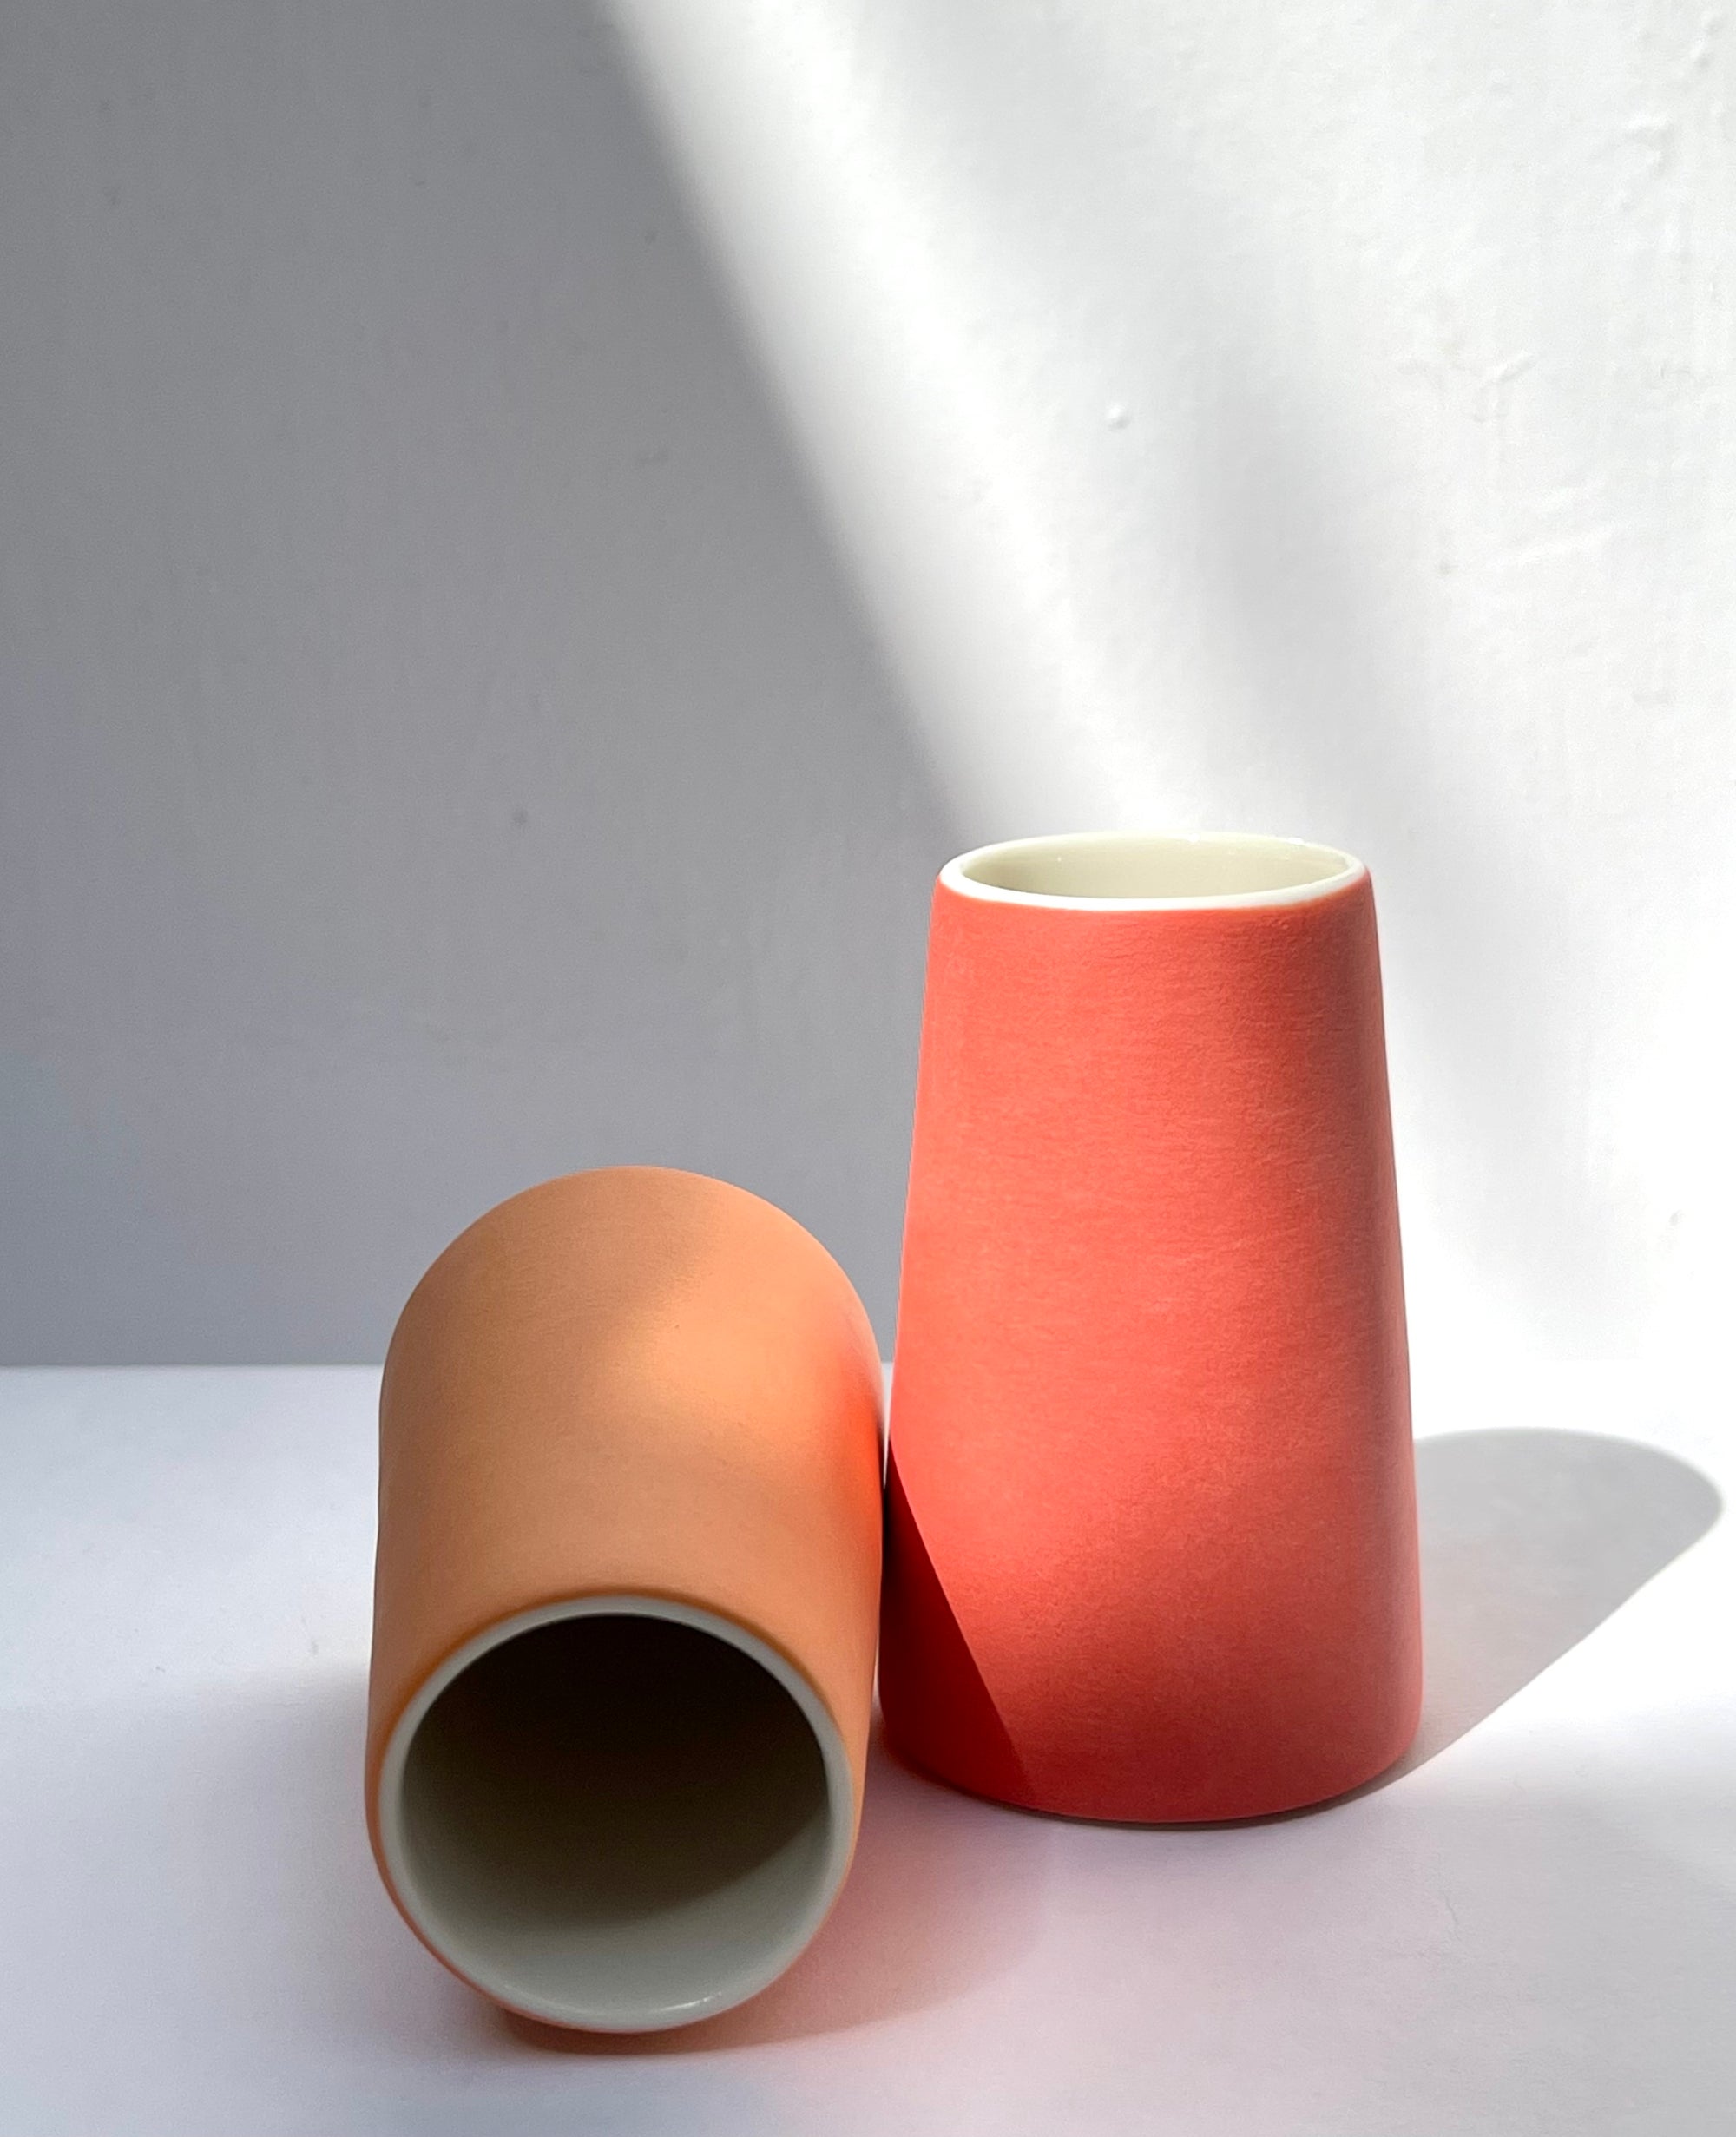 Pair of Mini Vases, in Shades of Coral, Adele Stanley